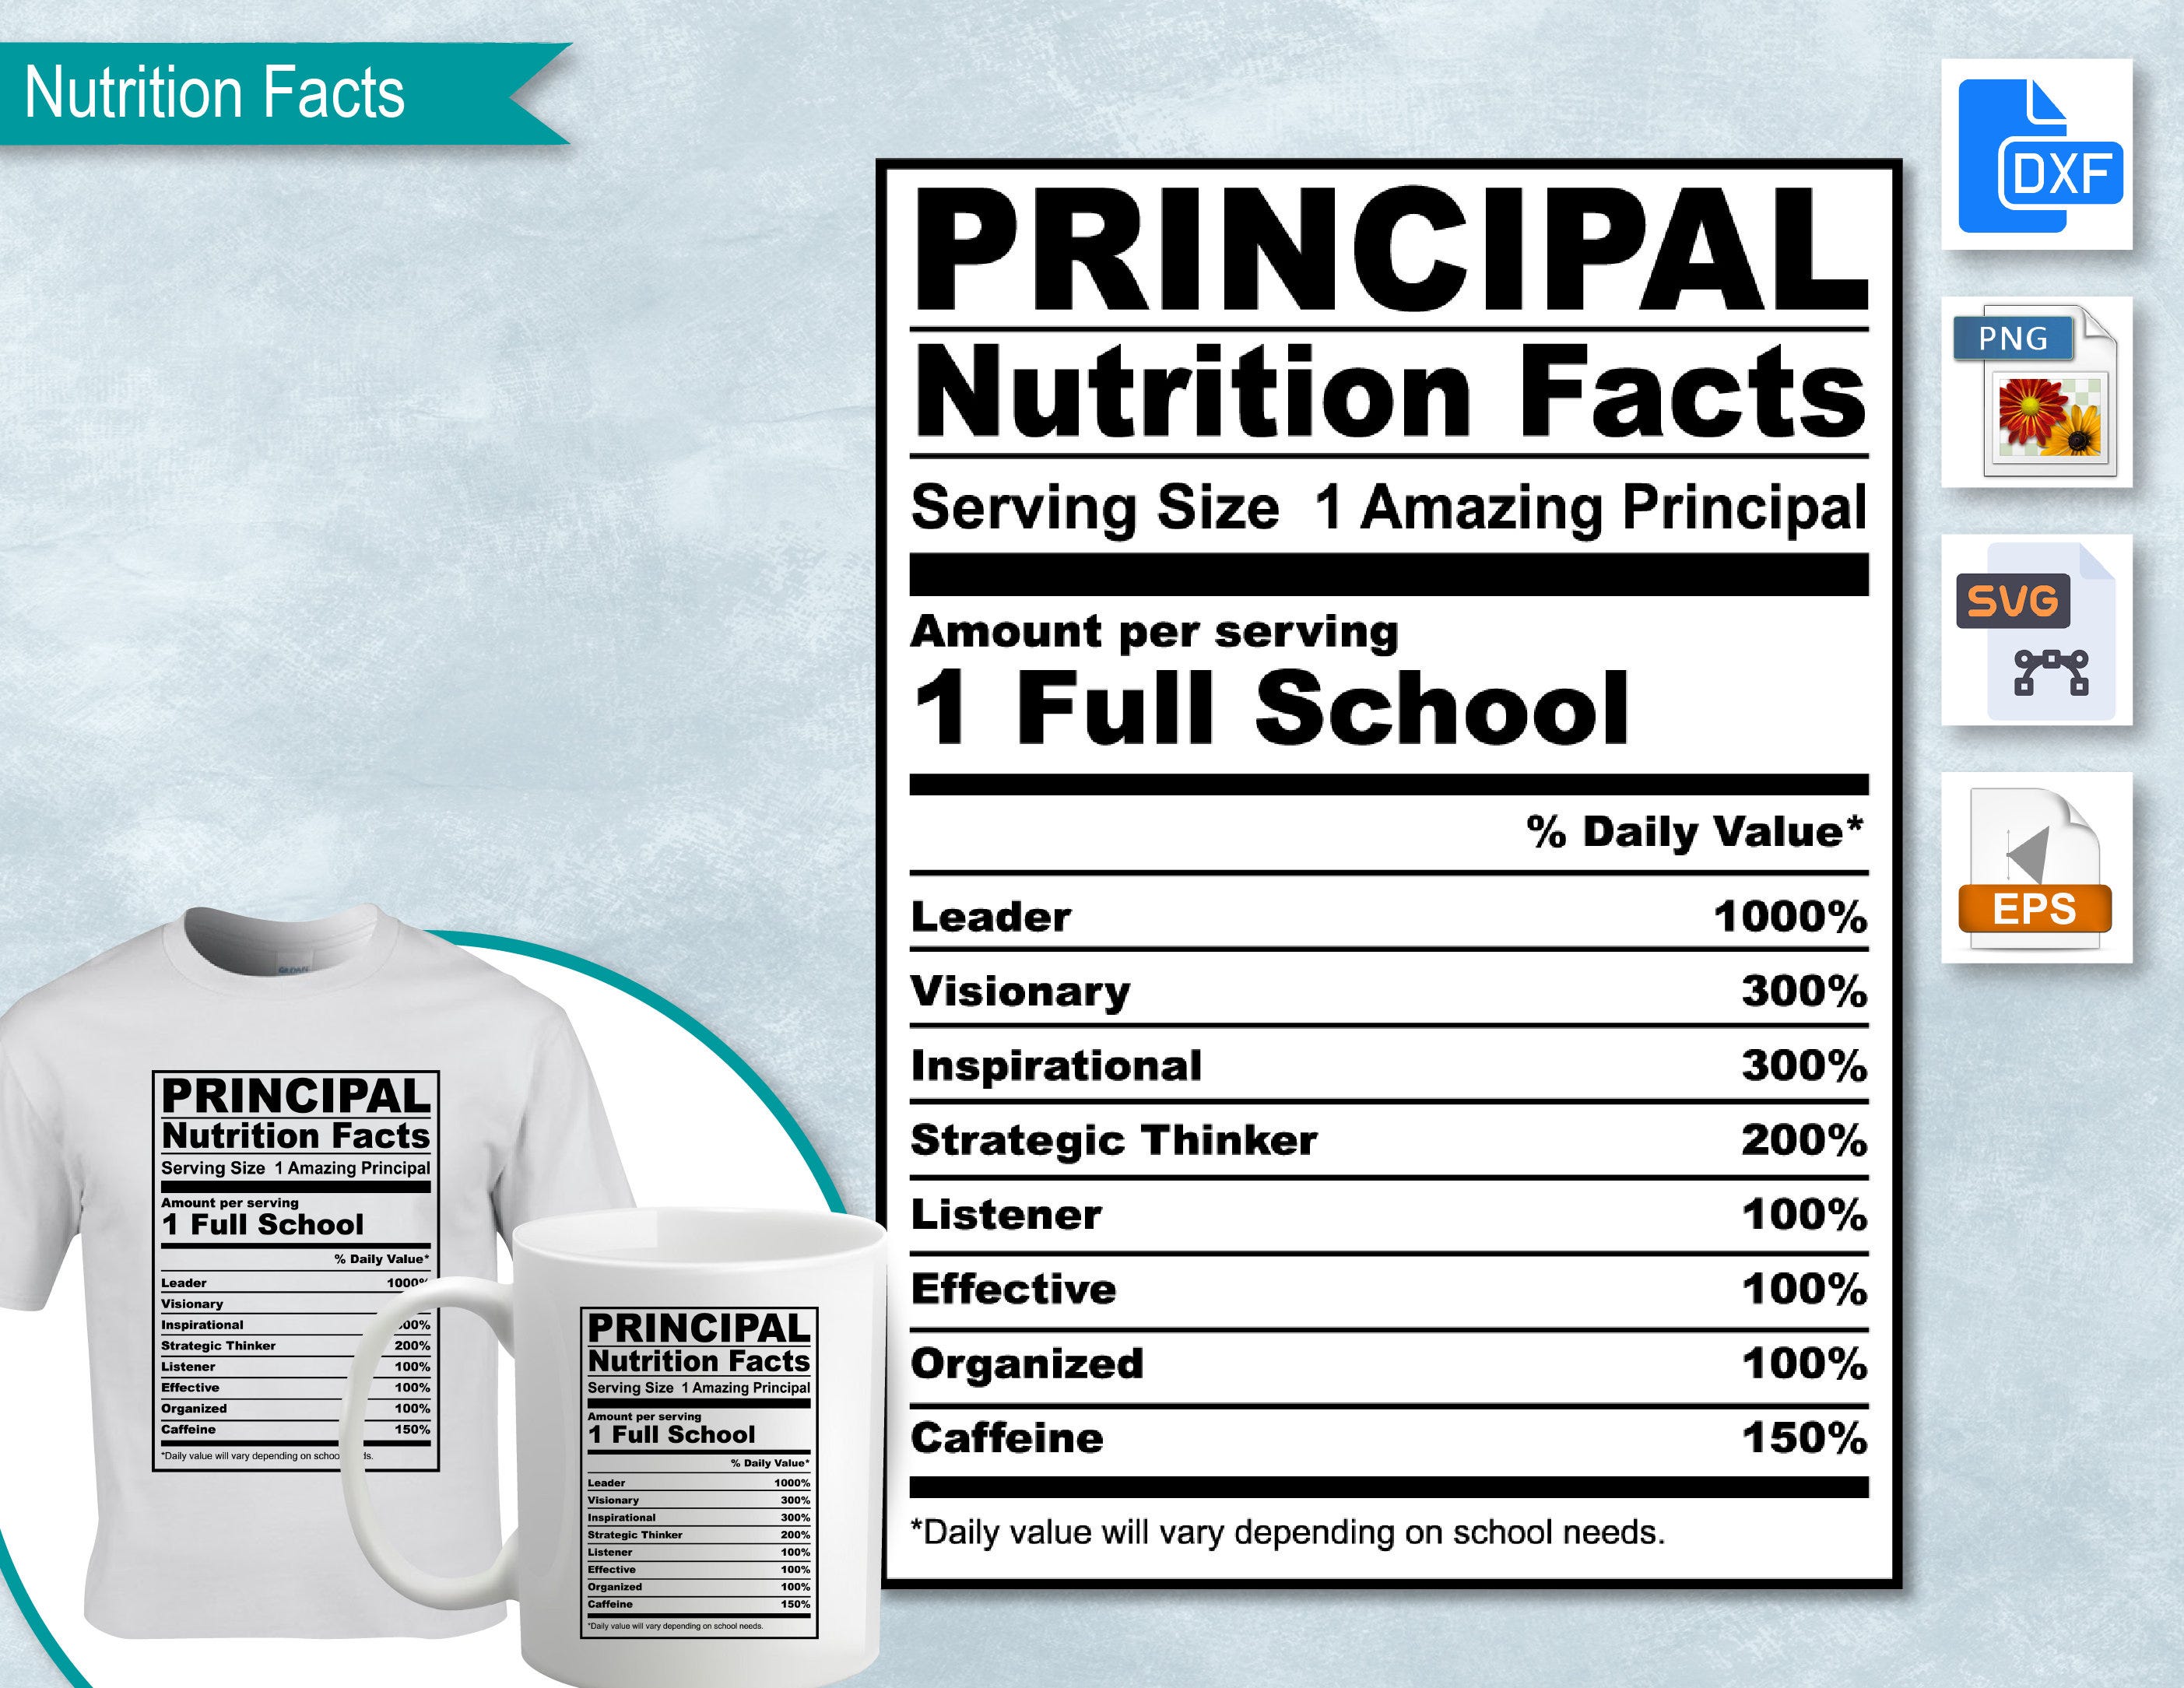 Principal Nutrition Facts,  SVG Nutritional Fact Label Template, Printable, DIY, Eps, PNG, SvG, DxF, Cricut, Silhouette